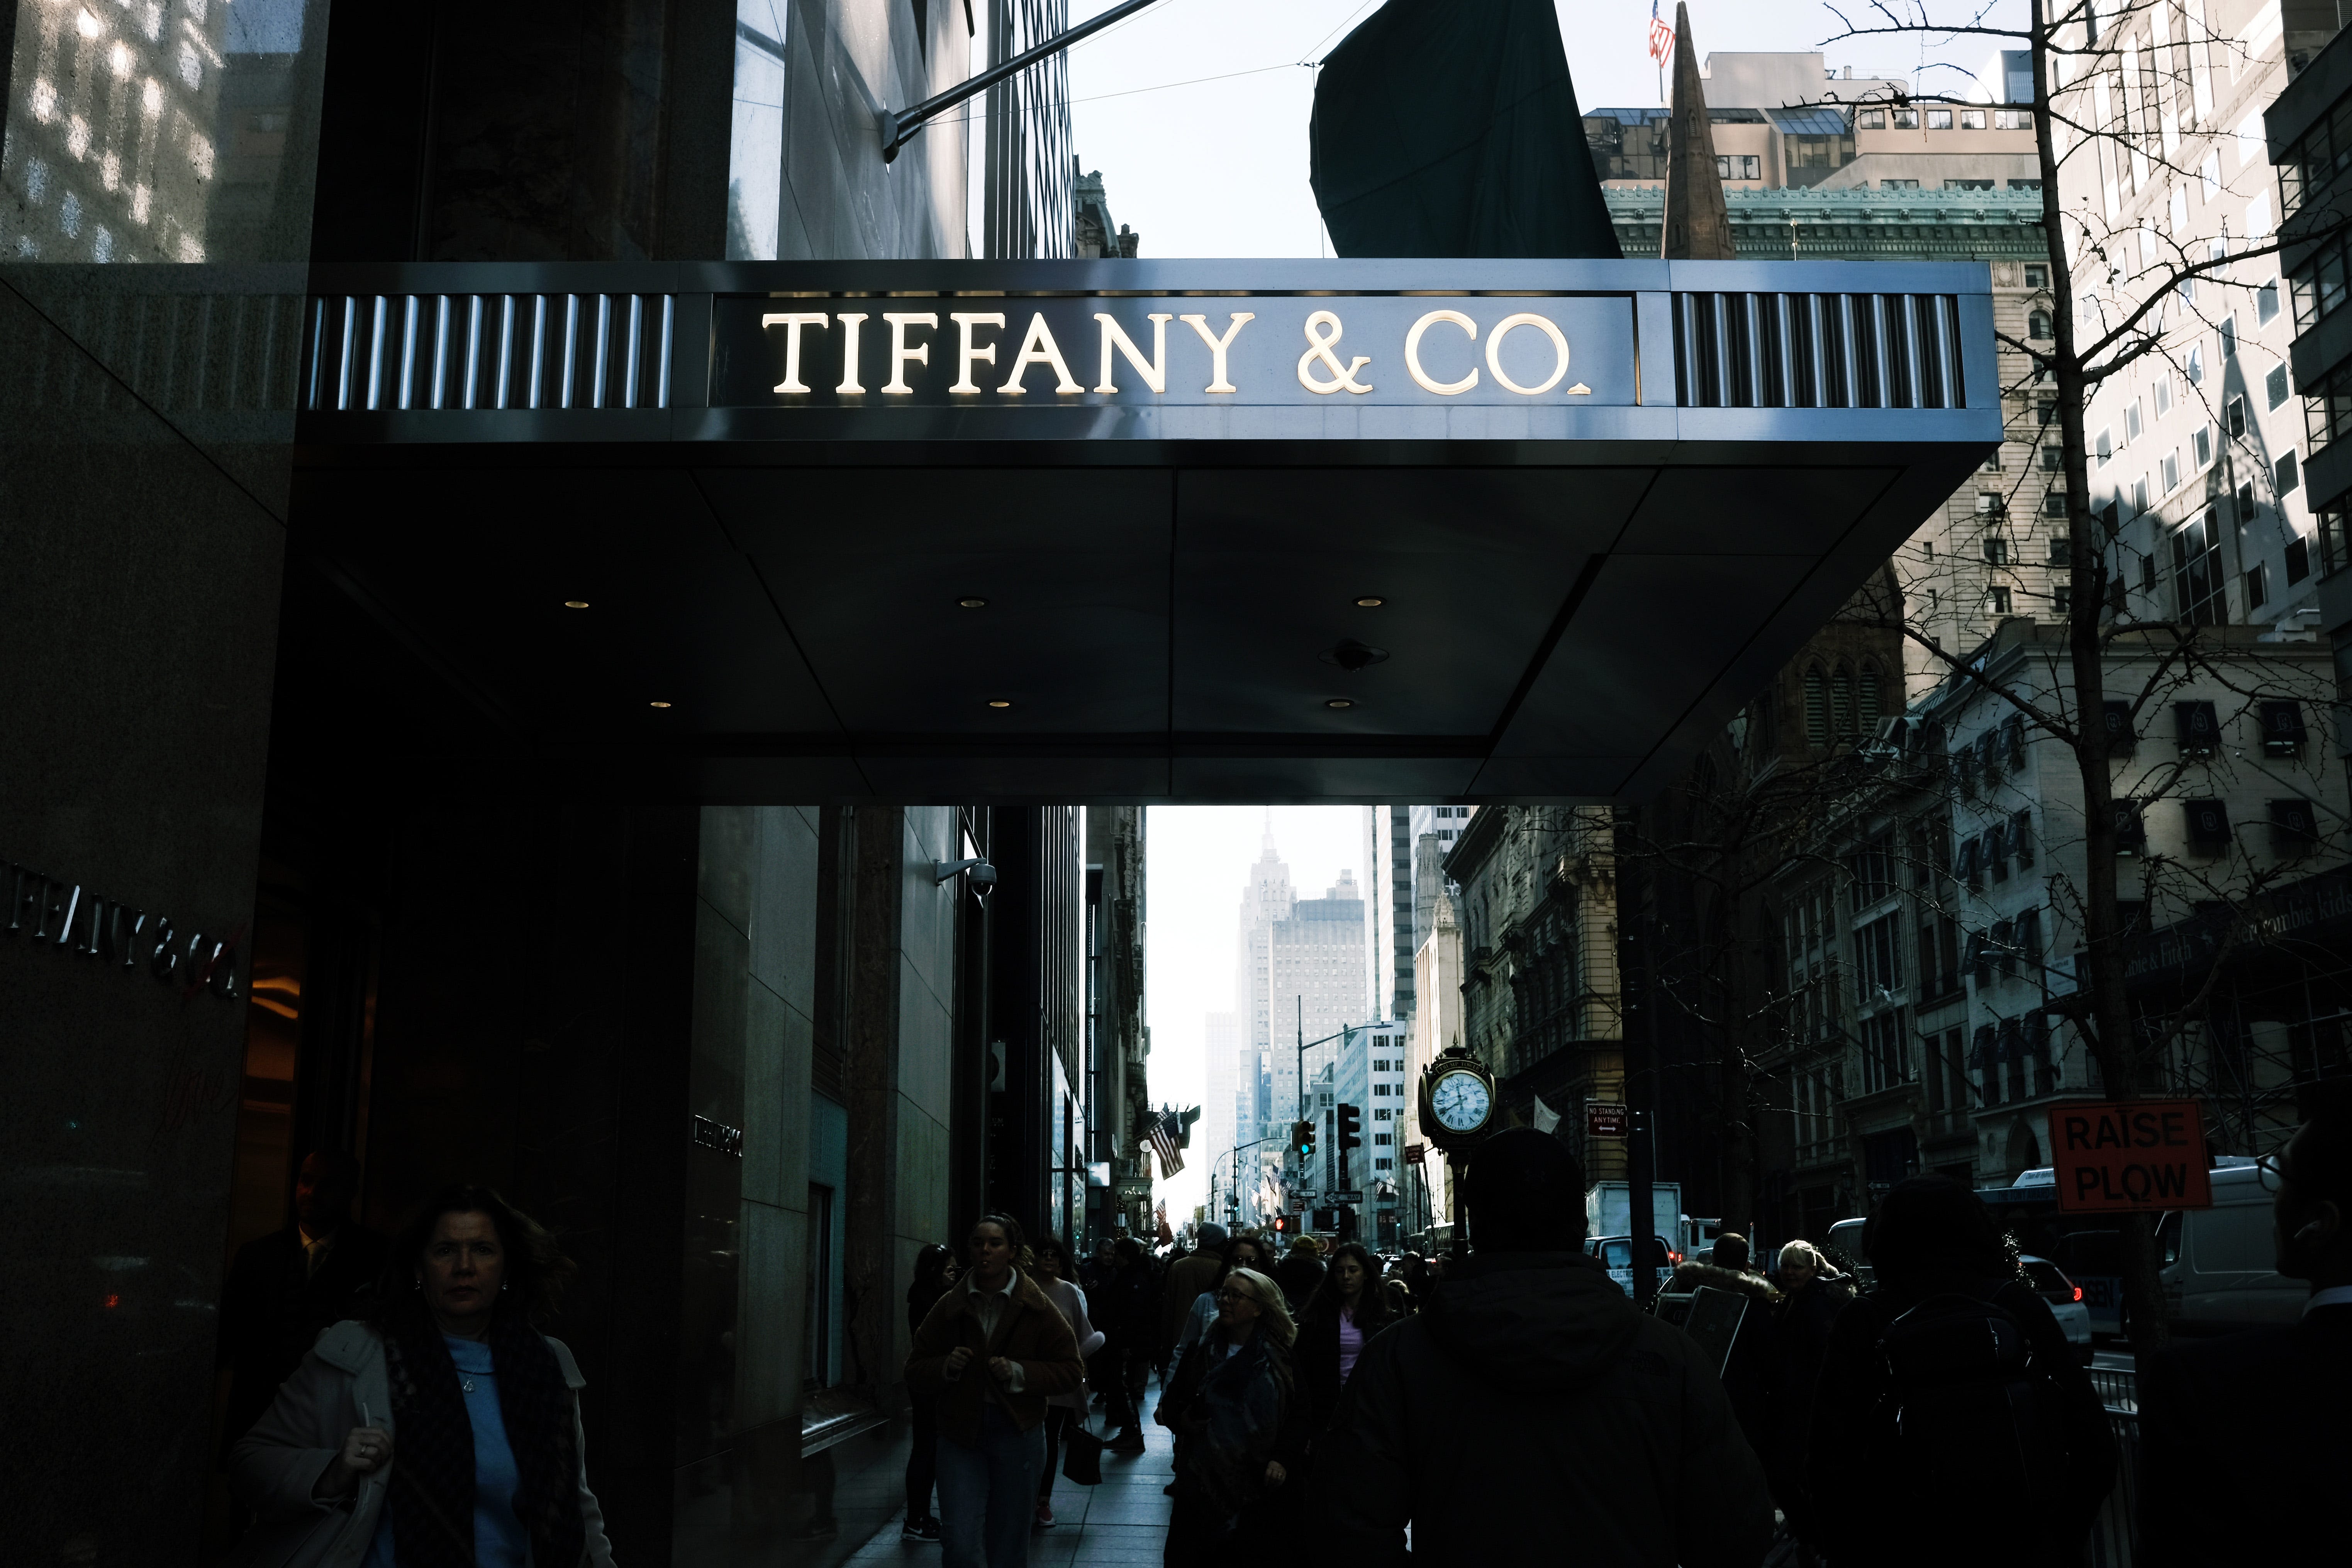 Serial jewel thief replaces $225,500 Tiffany diamond with cubic zirconia, NYPD says